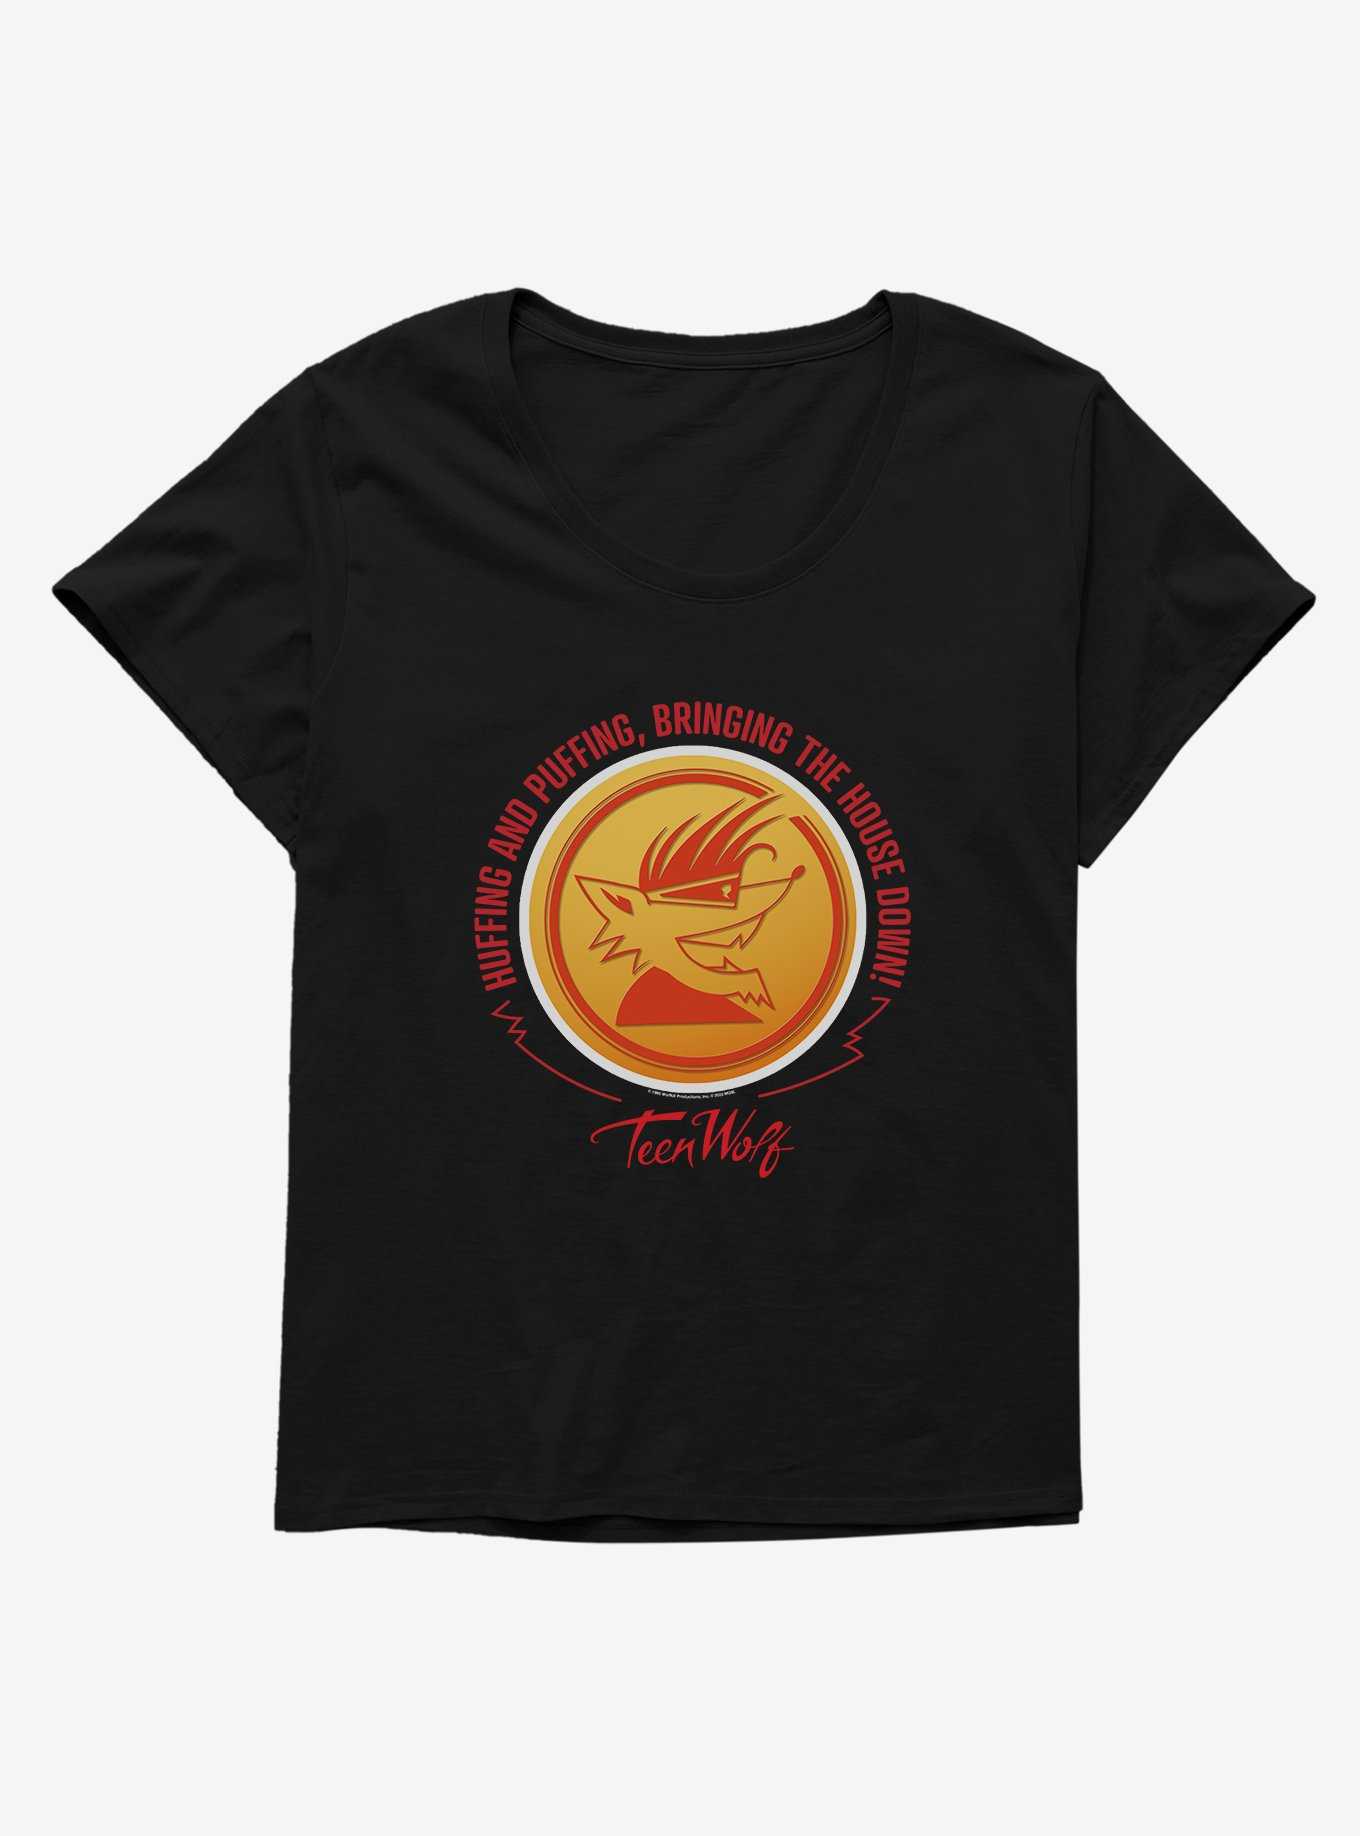 Teen Wolf Huffing and Puffing Girls T-Shirt Plus Size, , hi-res